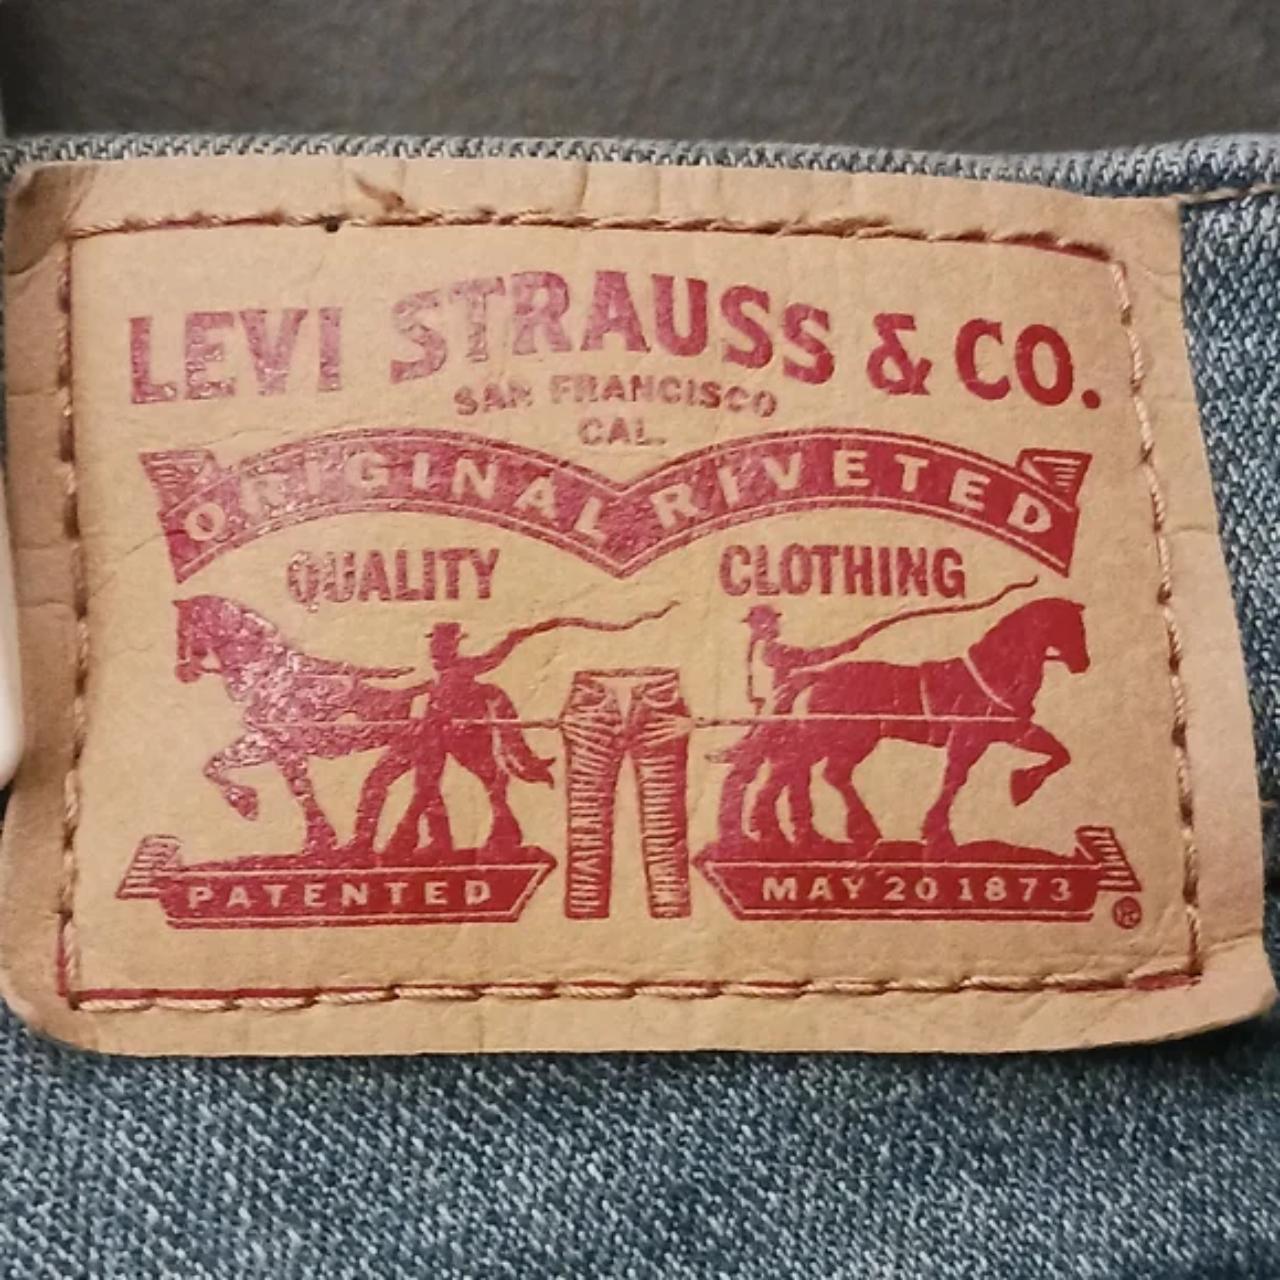 LEVI STRAUSS & CO. SLIMMING BOOT SIZE 29 - Depop